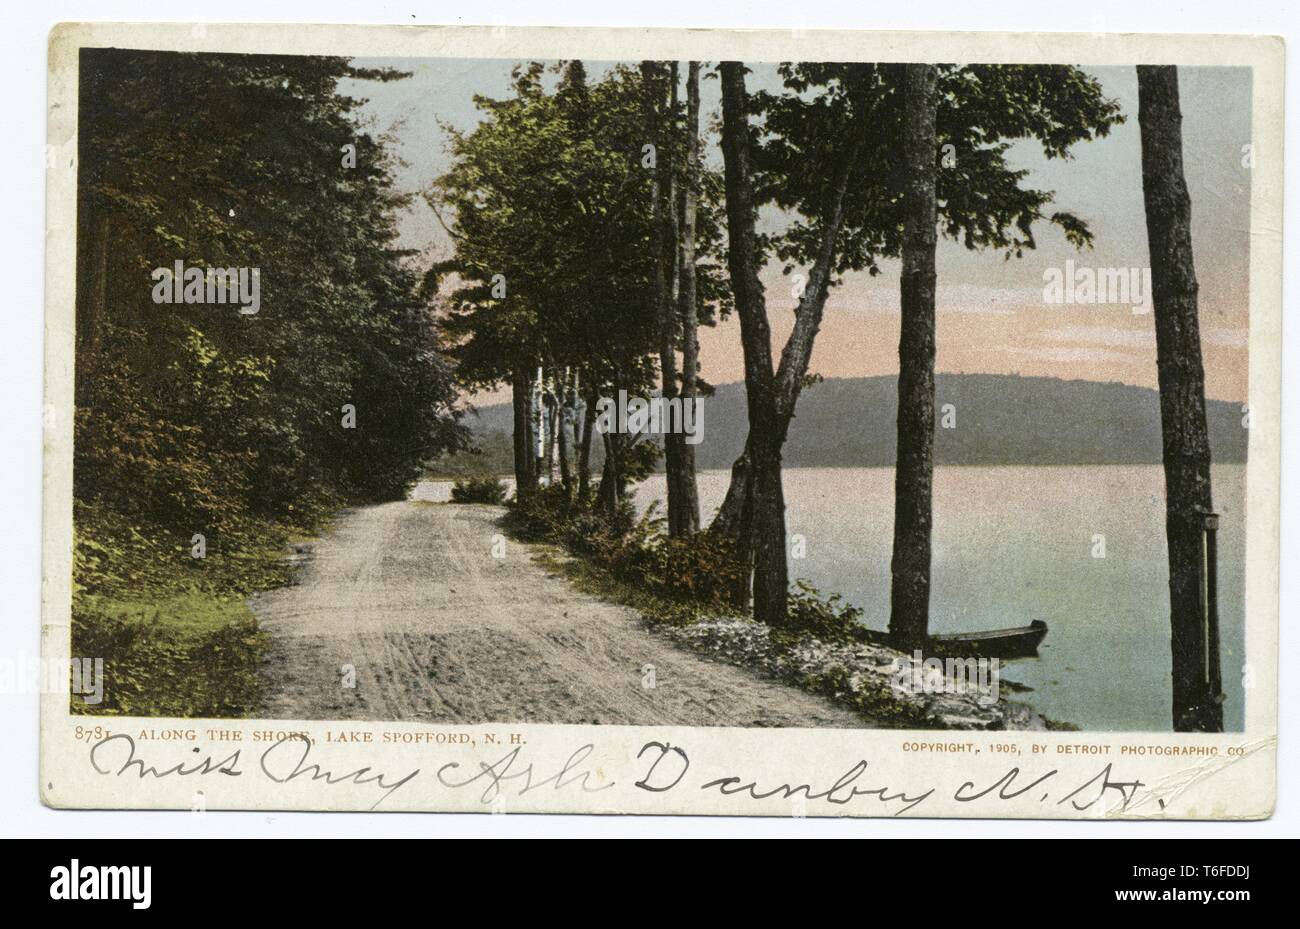 Detroit Publishing Company vintage postcard reproduction of the Lake Spofford shoreline in Chesterfield, New Hampshire, 1914. From the New York Public Library. () Stock Photo